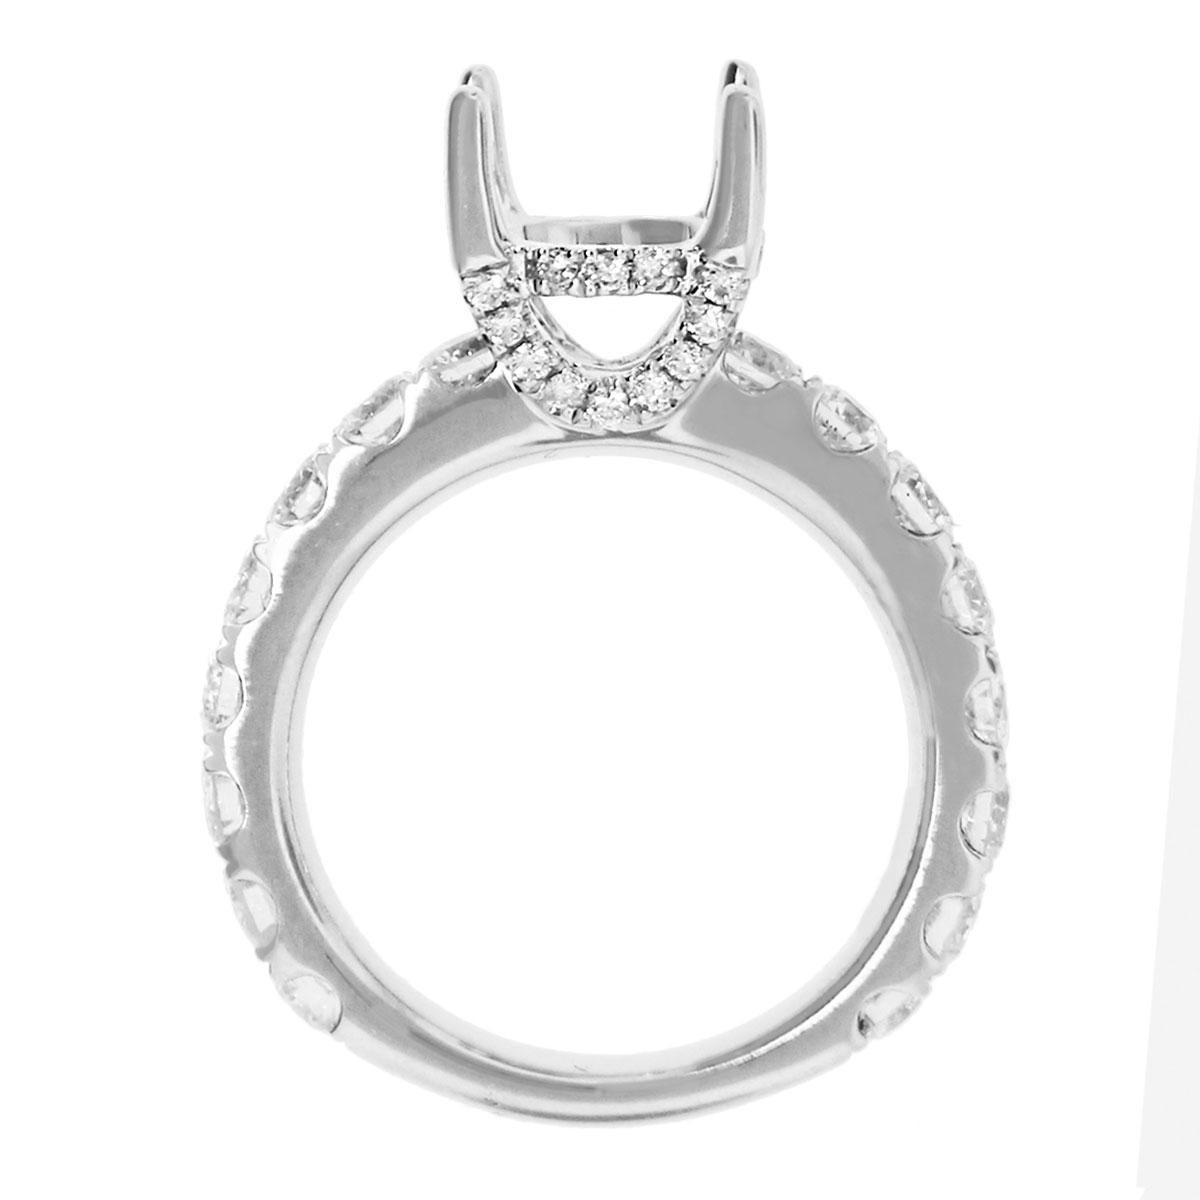 Material: 18k White Gold
Diamond Details: Approximately 1.81ctw round brilliant diamonds. Diamonds are G/H in color and Si1 in clarity.
Ring Size: 6.5 (can be sized)
Total Weight: 6.6g (4.2dwt)
Measurements: 0.80